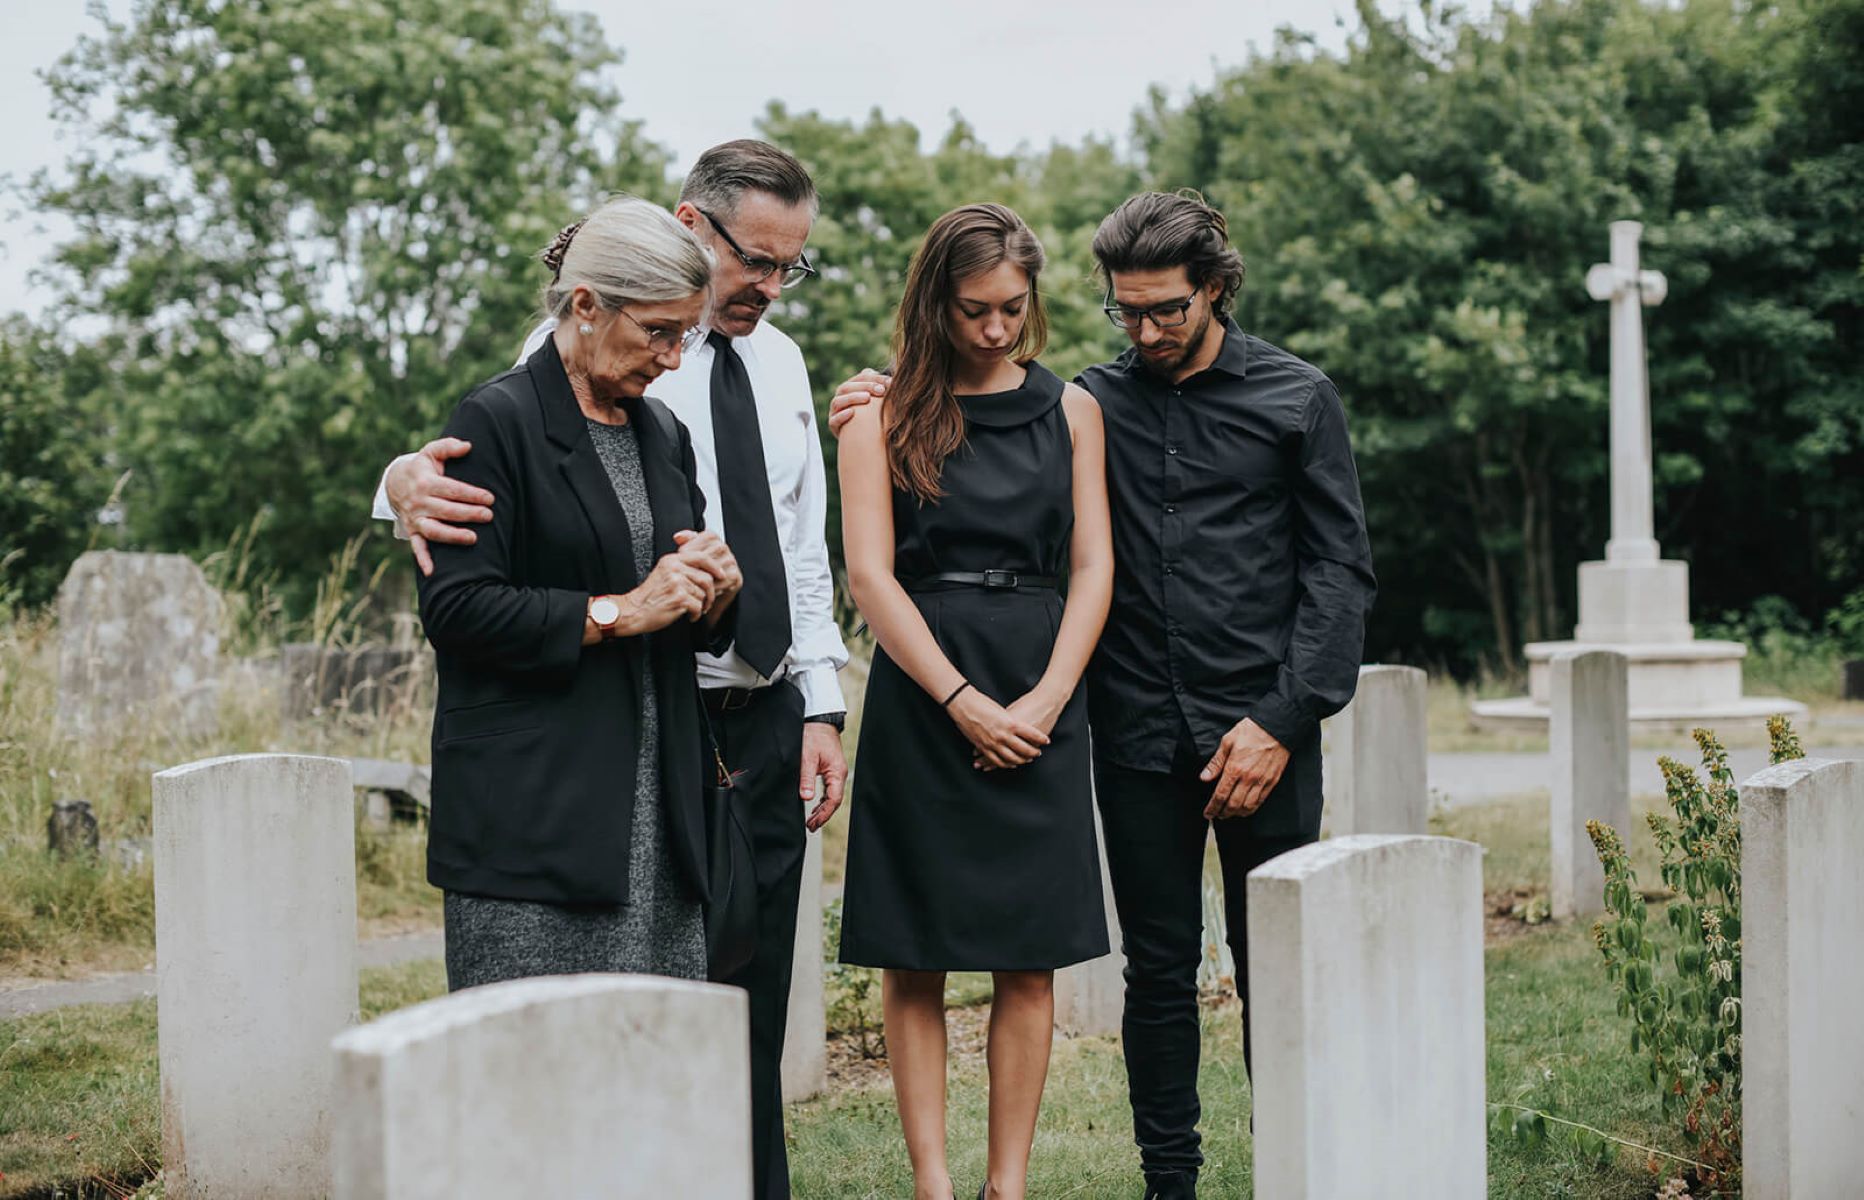 Summer Funeral Outfit Ideas: Stylish And Appropriate Attire